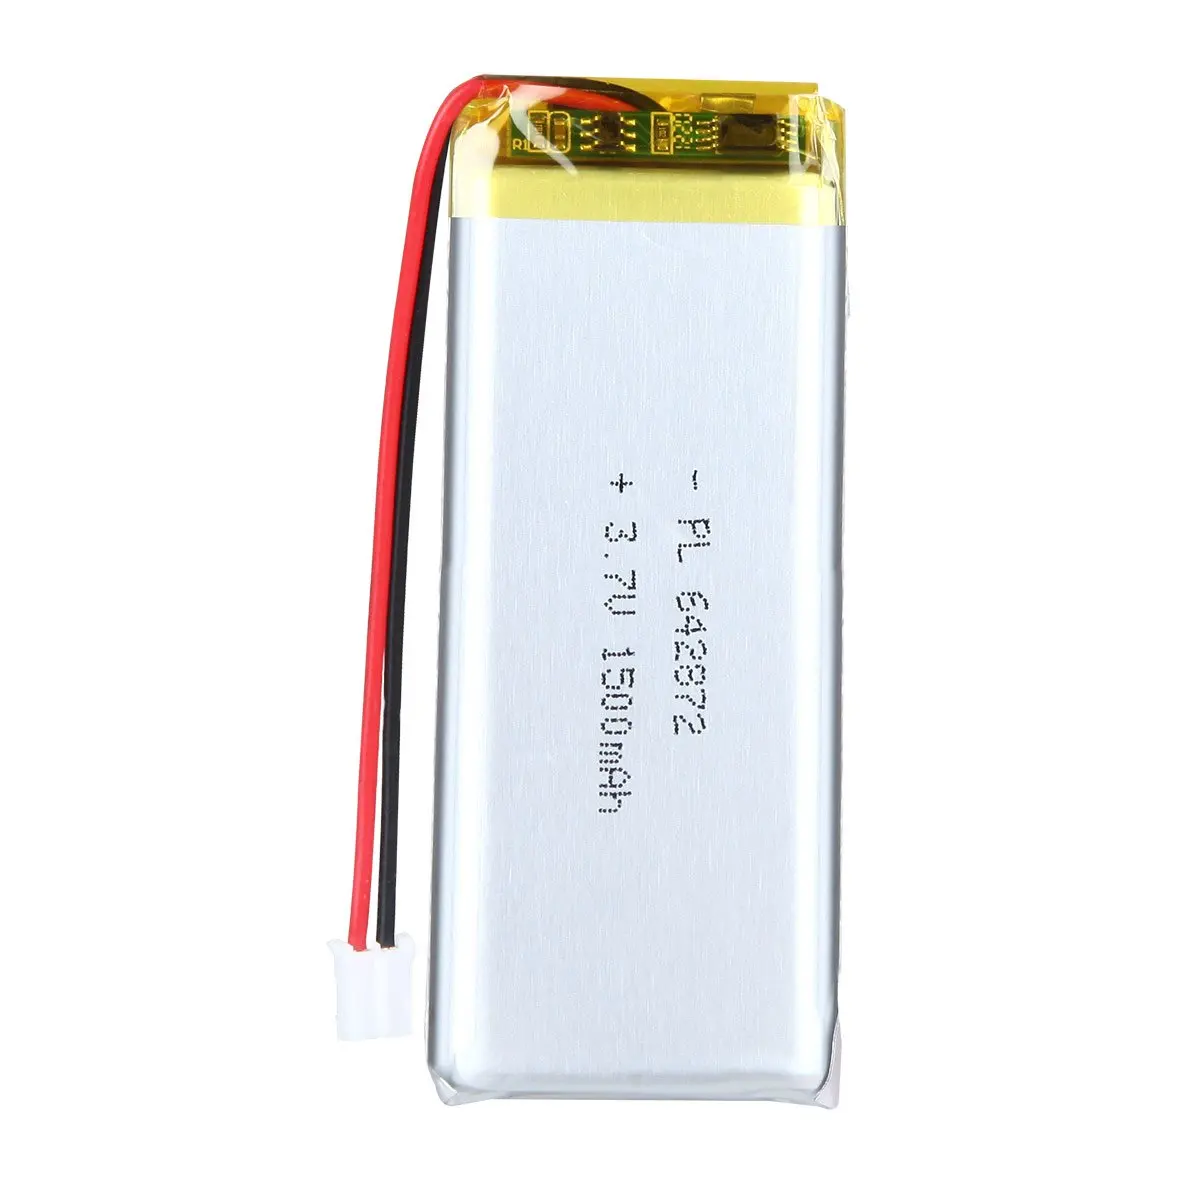 Фото AKZYTUE 3.7V 1500mAh 642872 Rechargeable Lipo Battery with JST Connector | Электроника